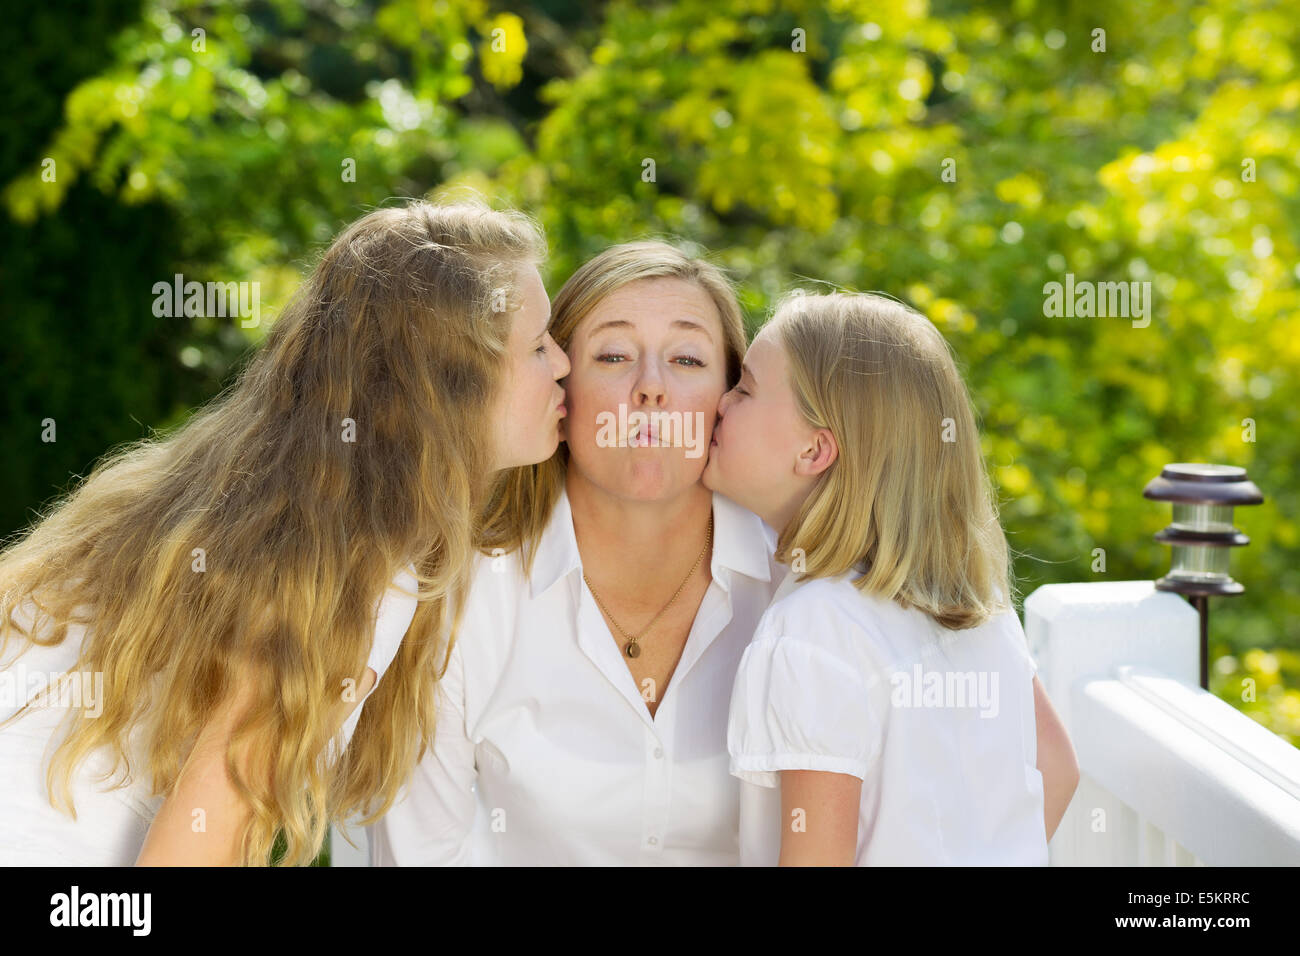 Front view of mother, displaying fish lips, being kissed by her two daughters outdoors on patio with woods in background Stock Photo